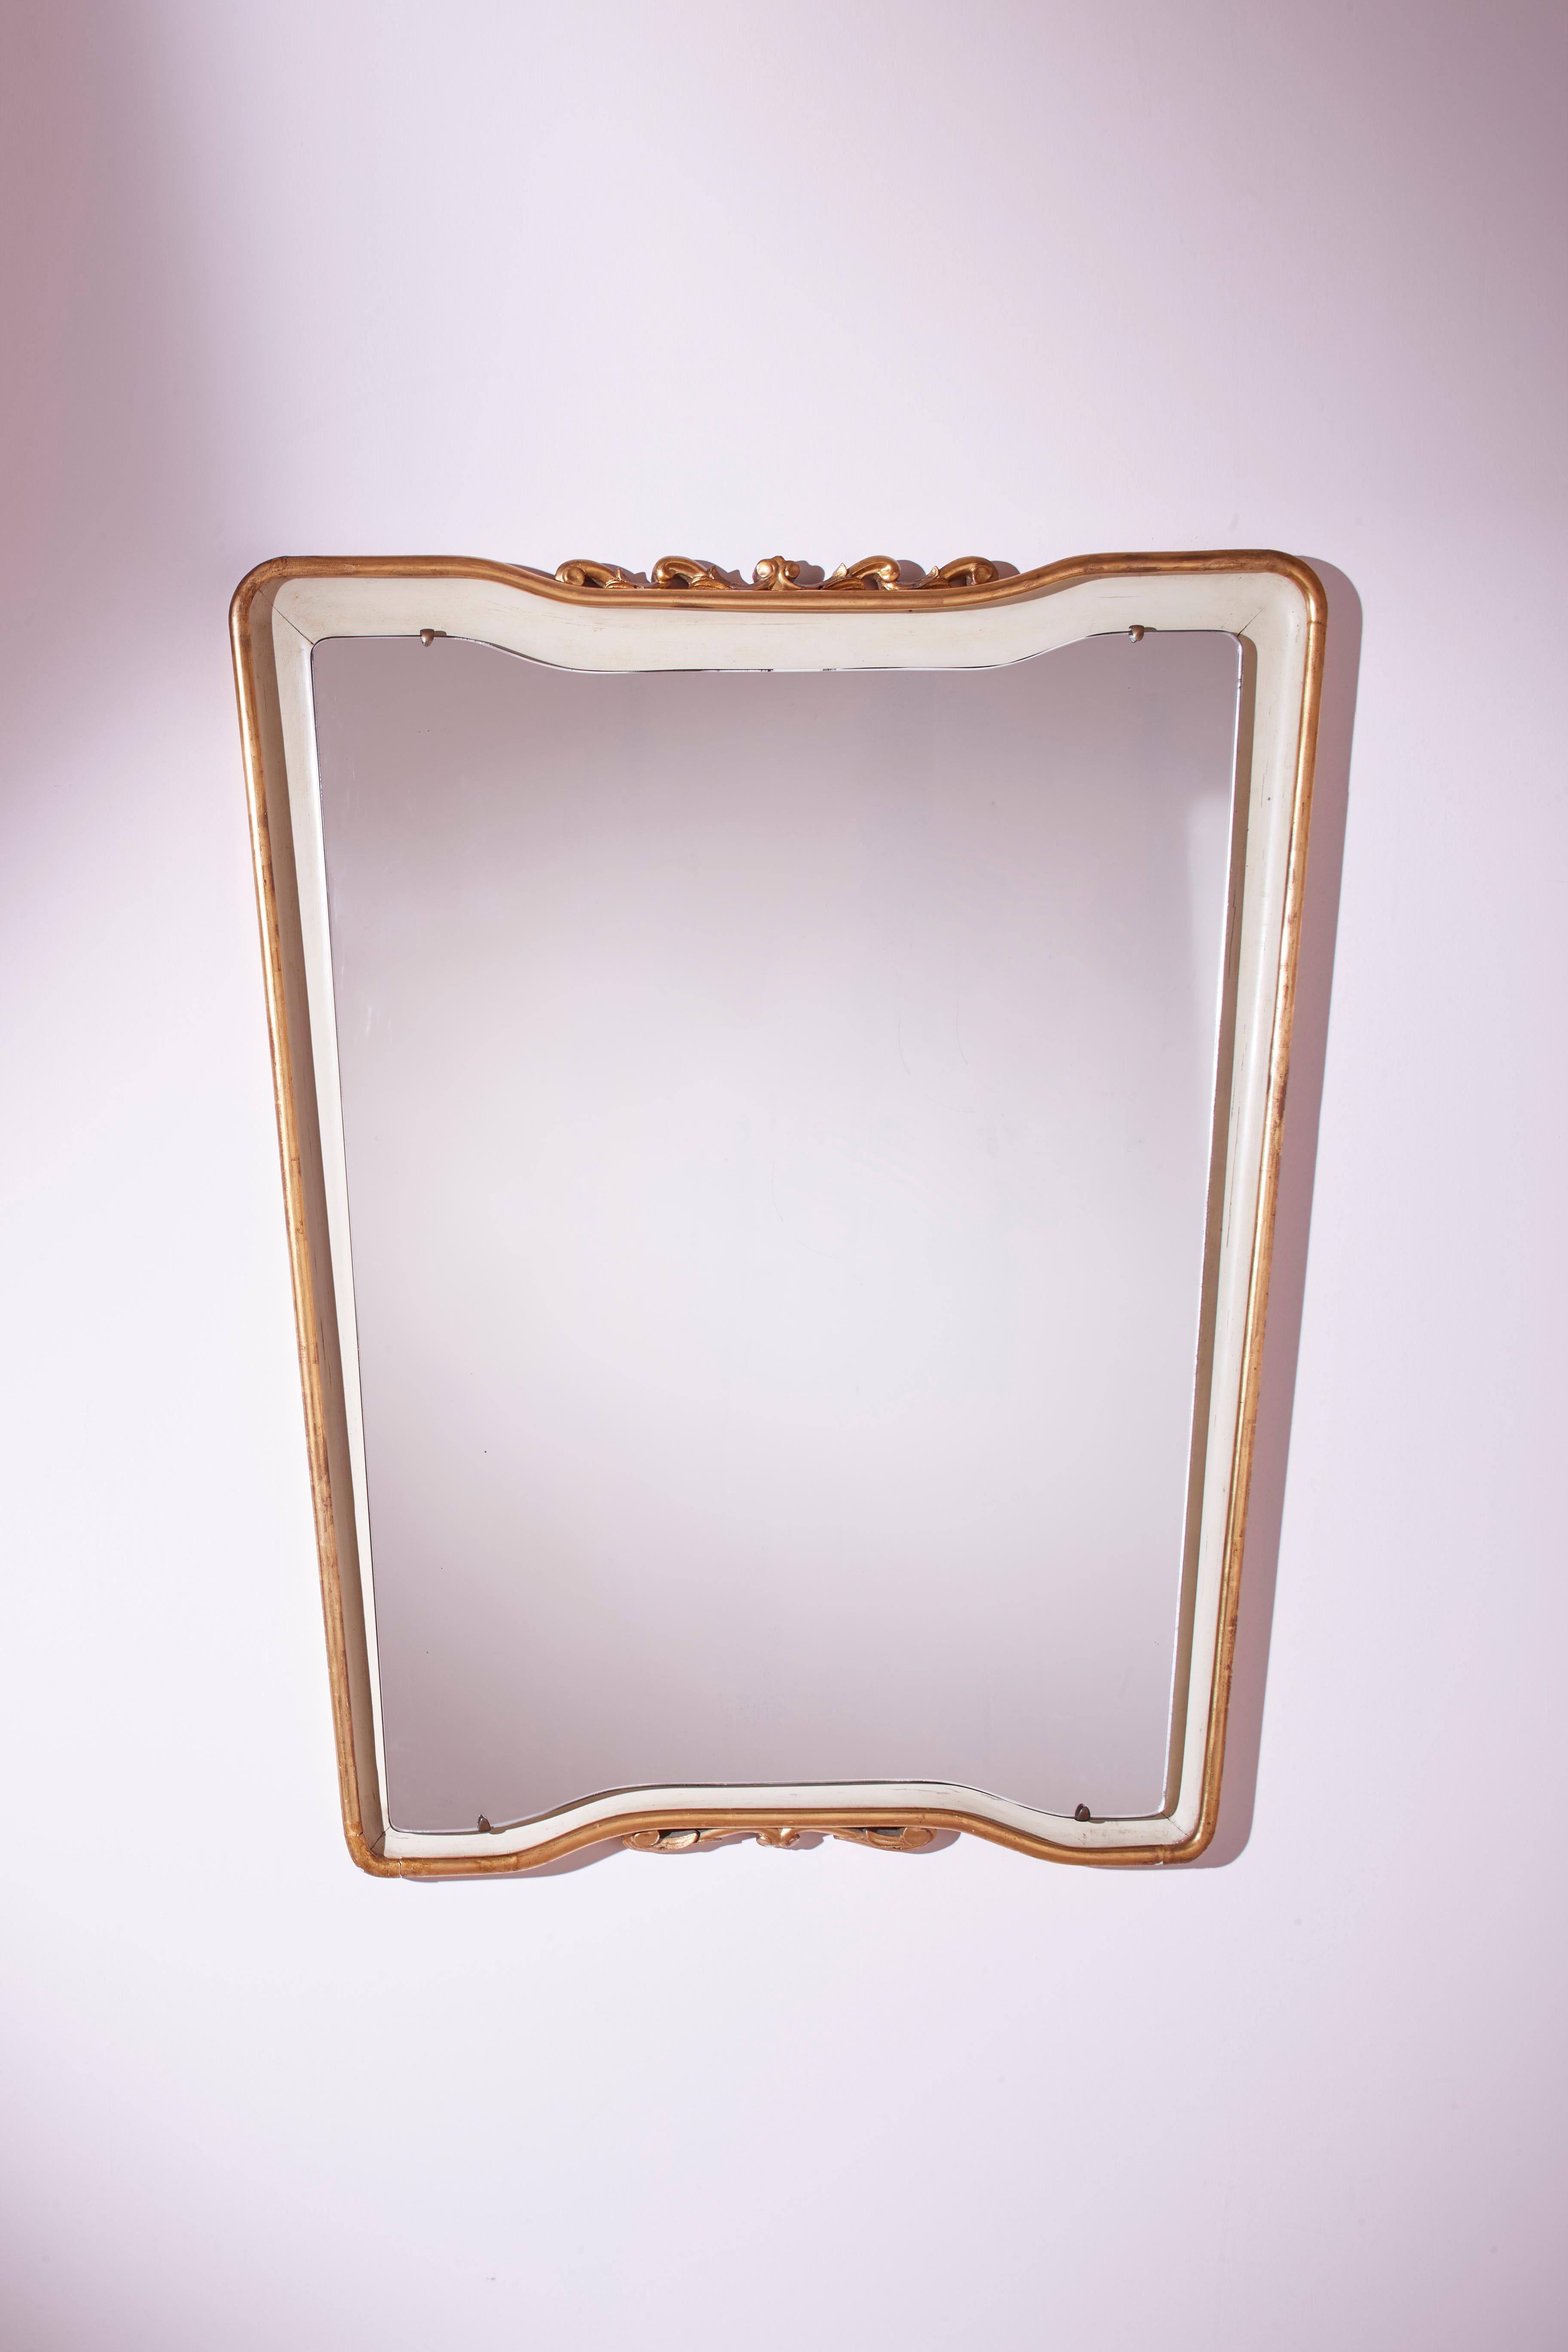 A splendid trapezoidal mirror with a lacquered and gilded frame is an authentic Italian creation from the 1950s, designed by Osvaldo Borsani.

This impressive full-length mirror is composed of an original plate from the 1950s, enhanced by an